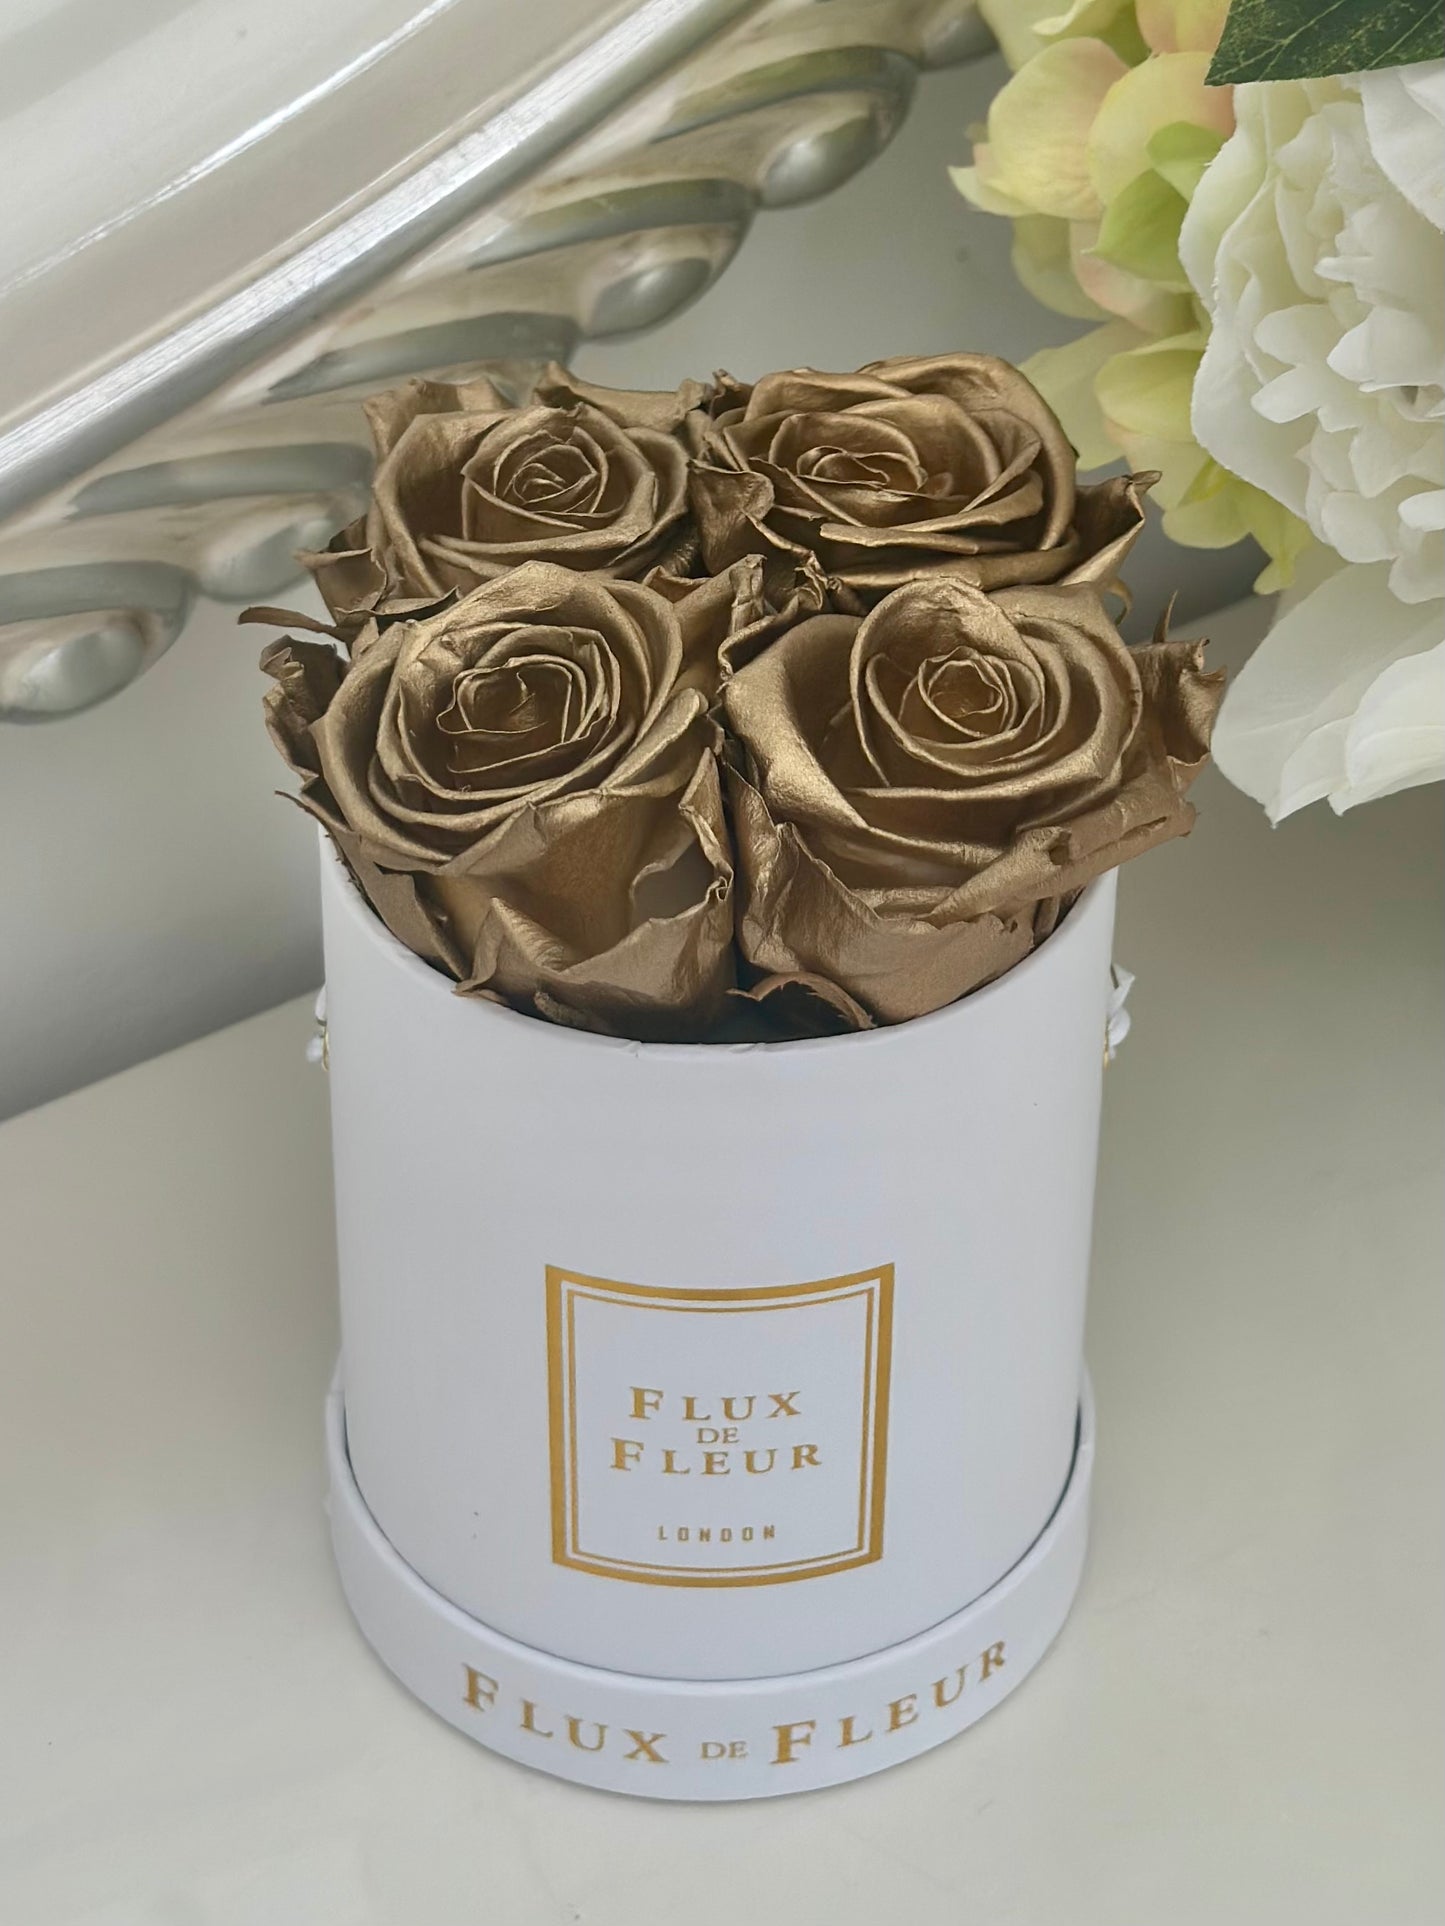 Infinity De Small Round - Roses In A Box